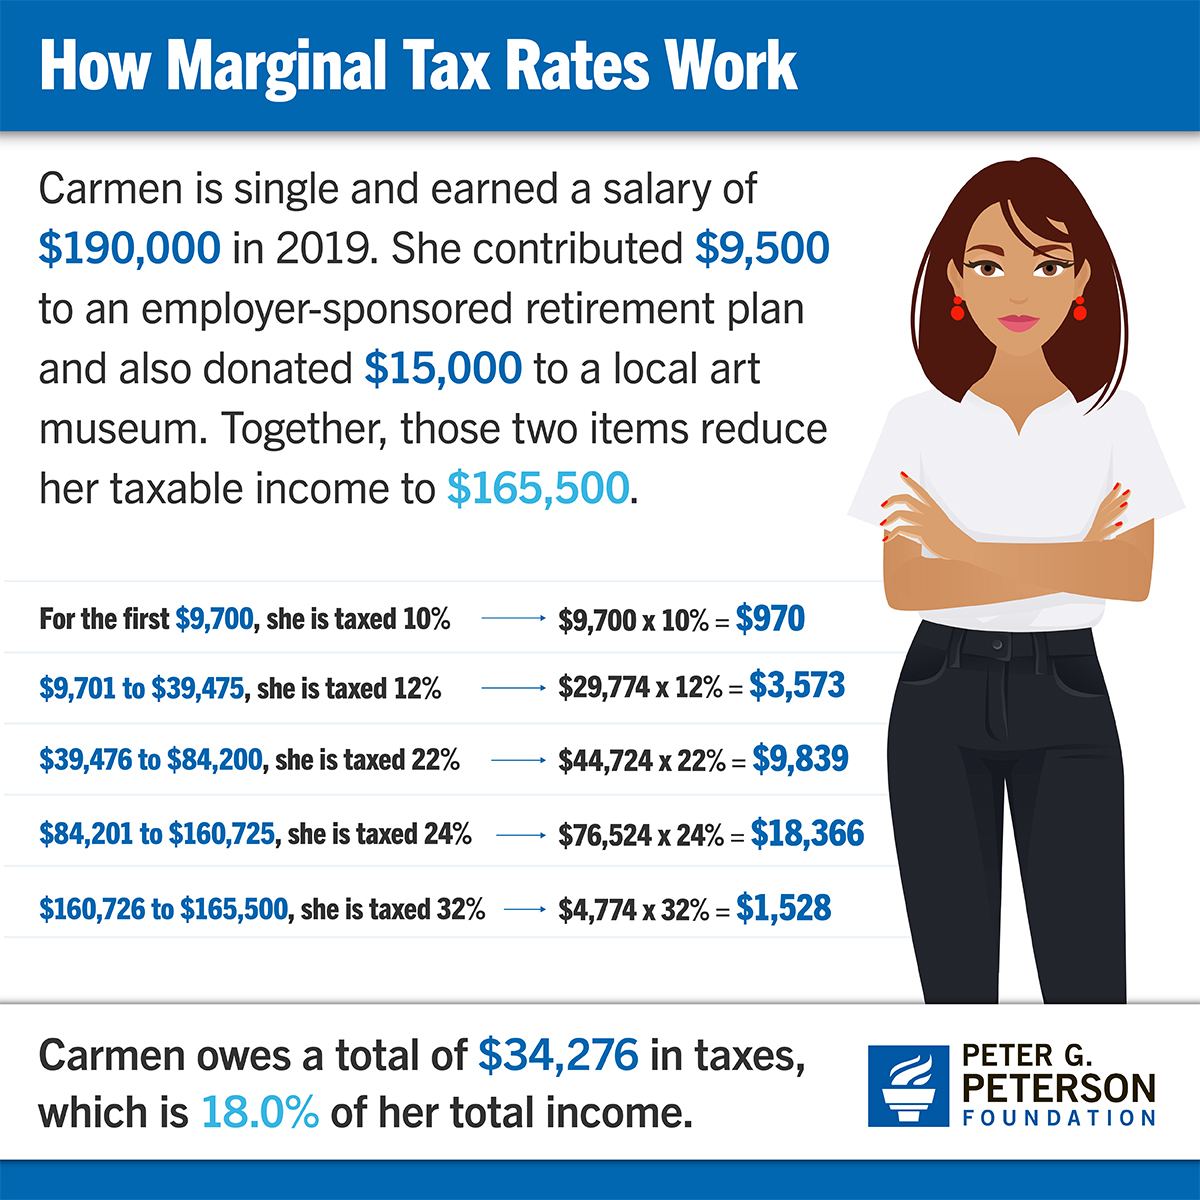 Four Simple Scenarios That Show How Marginal Rates and Tax Breaks Affect What People Actually Pay